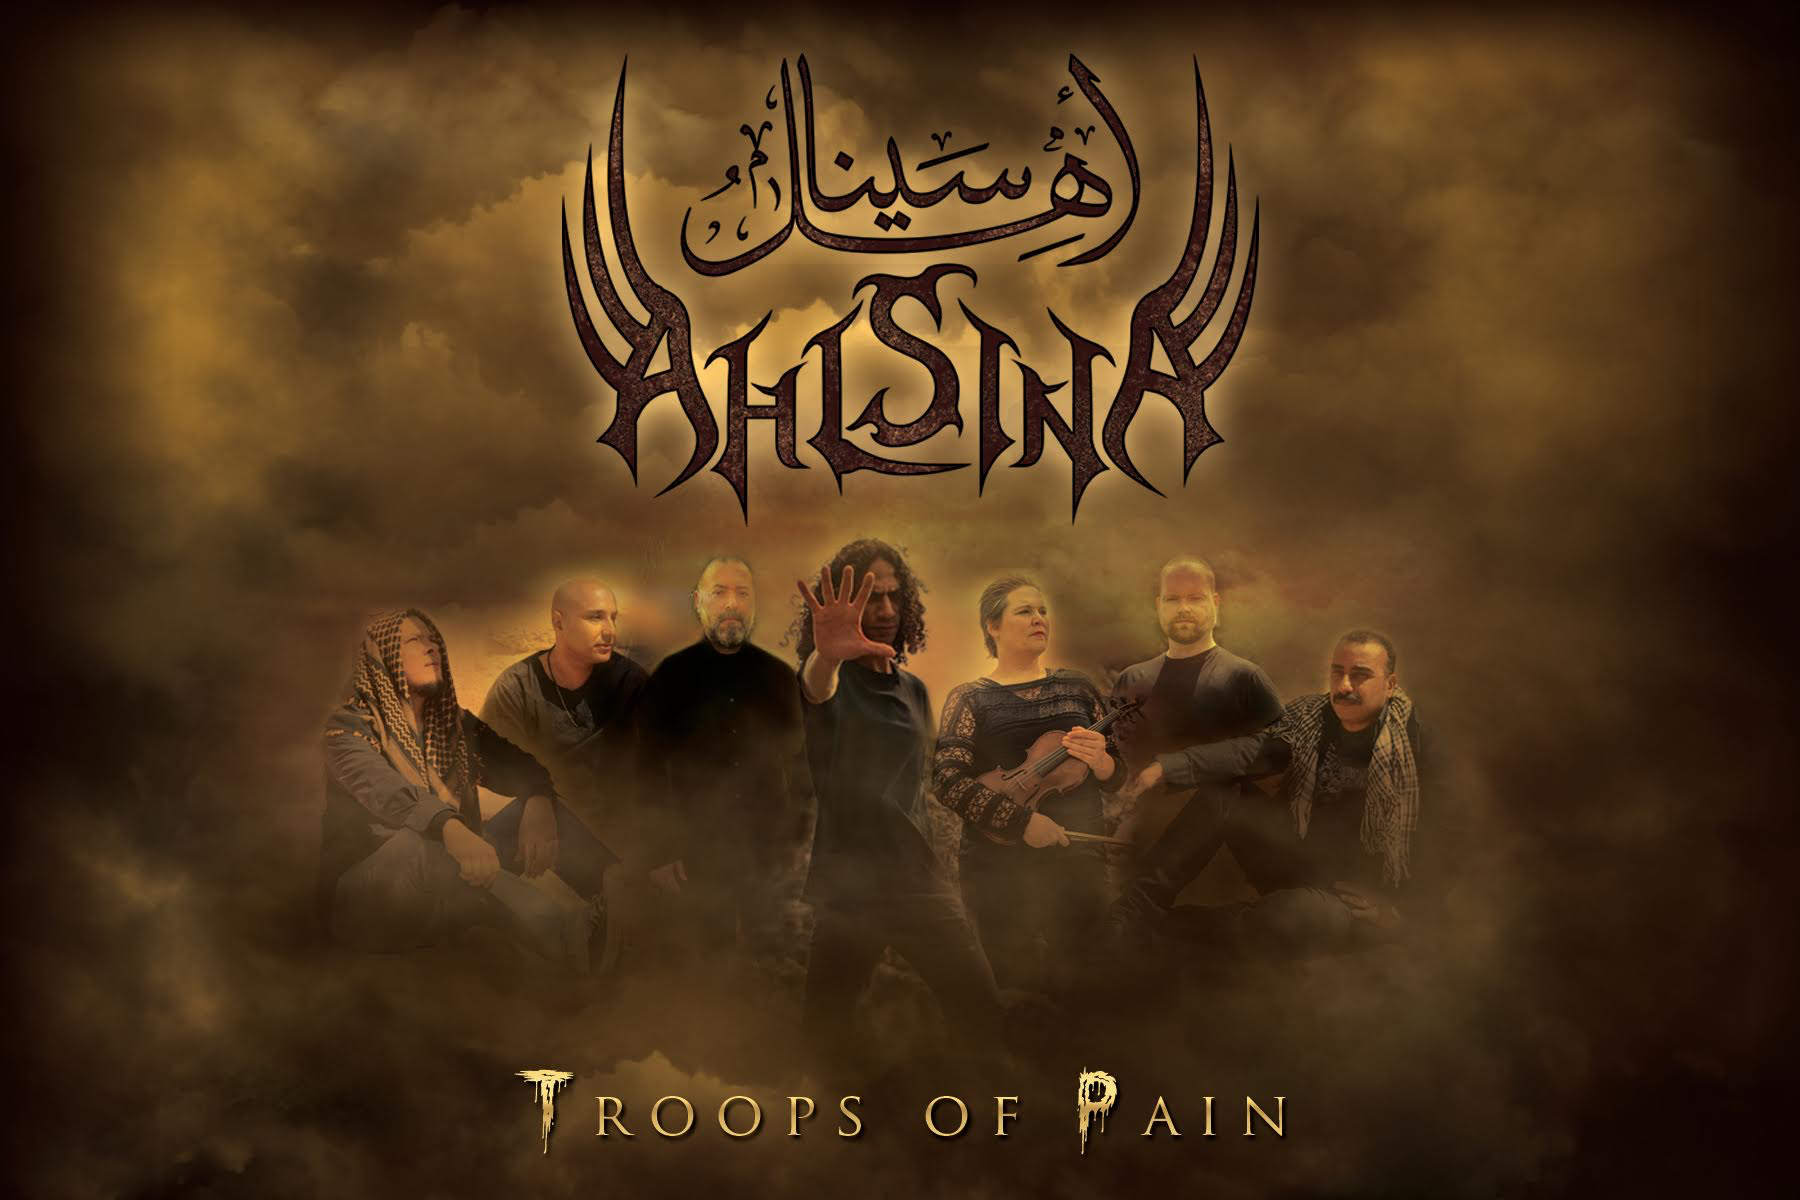 A poster for the album "Troops of Pain" by the band Ahl Sina